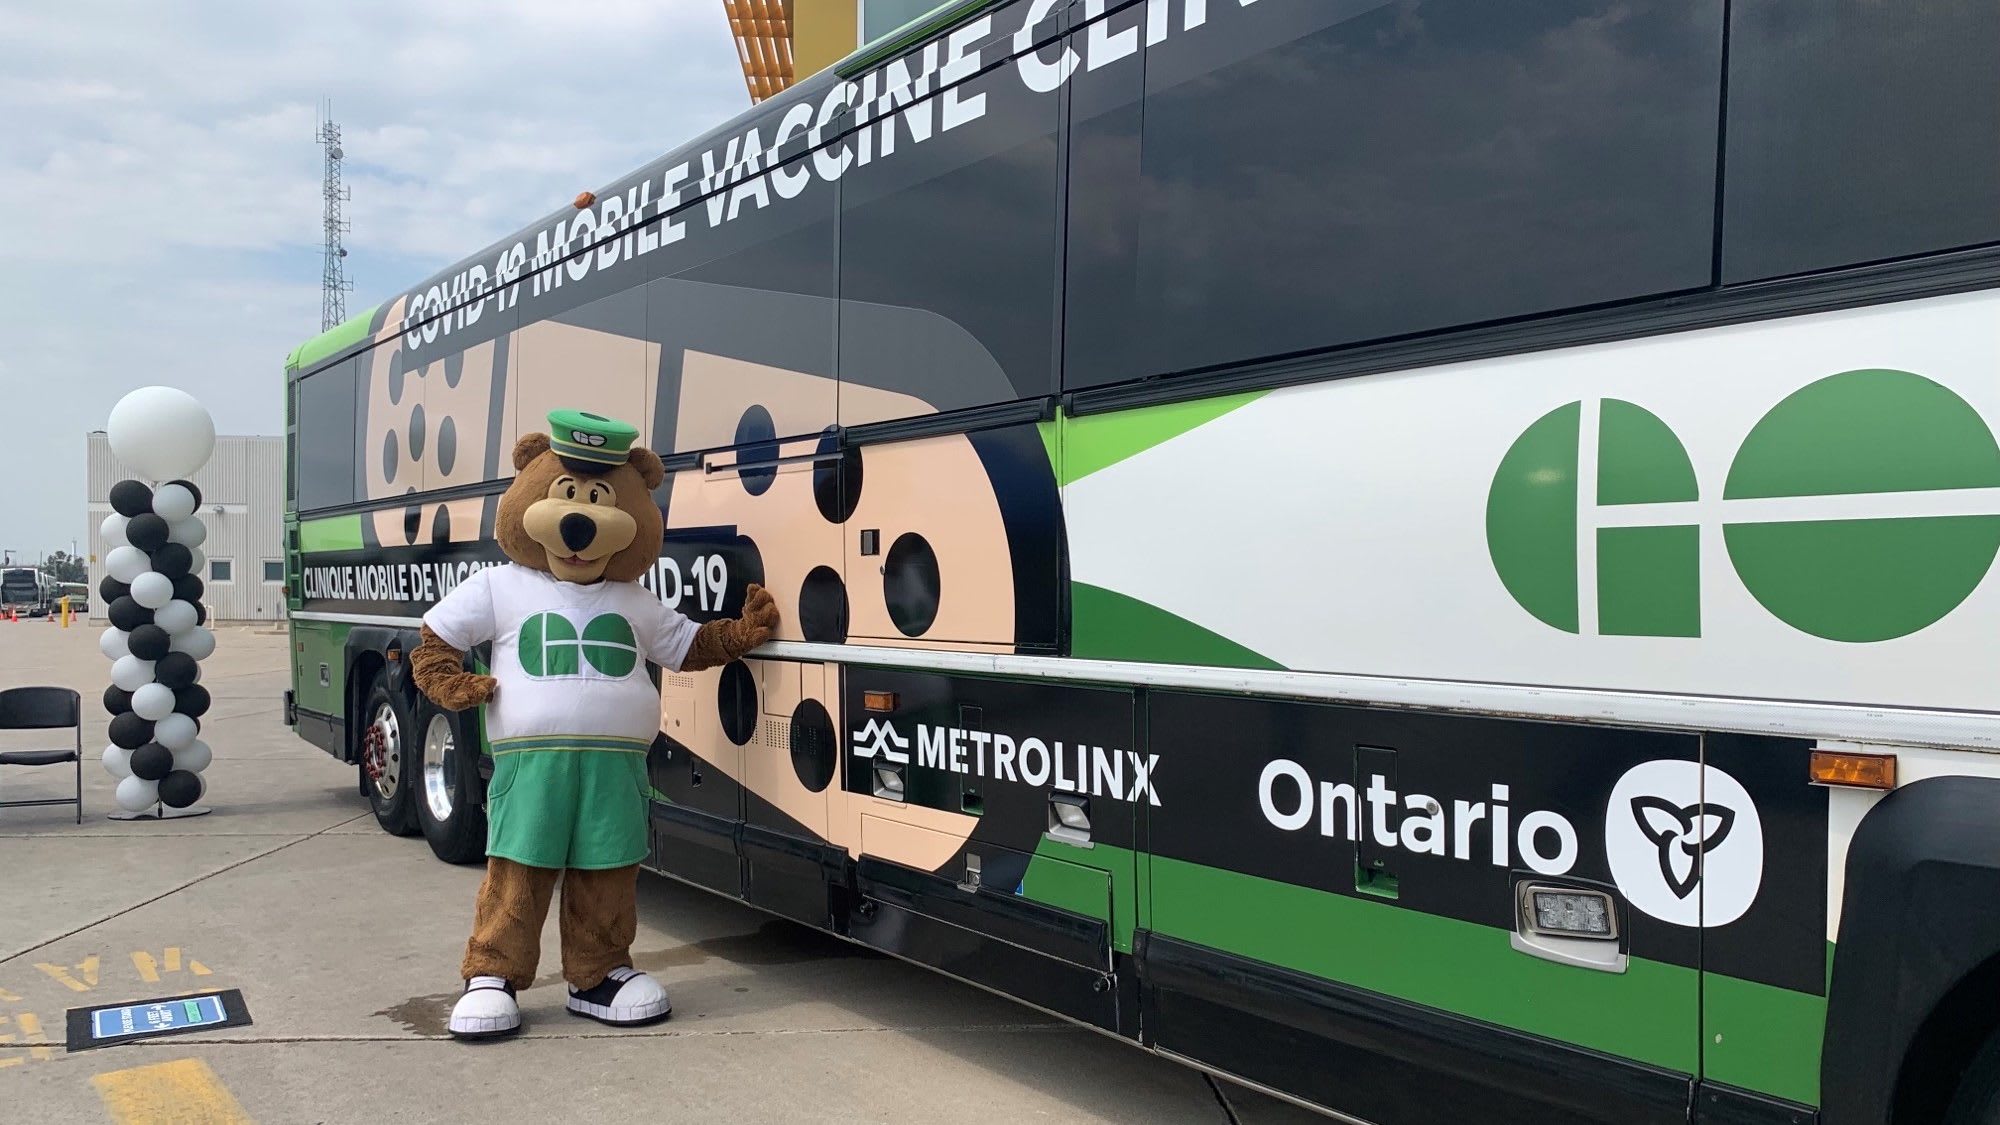 GO Bear stands with one of the newly minted GO-VAXX buses